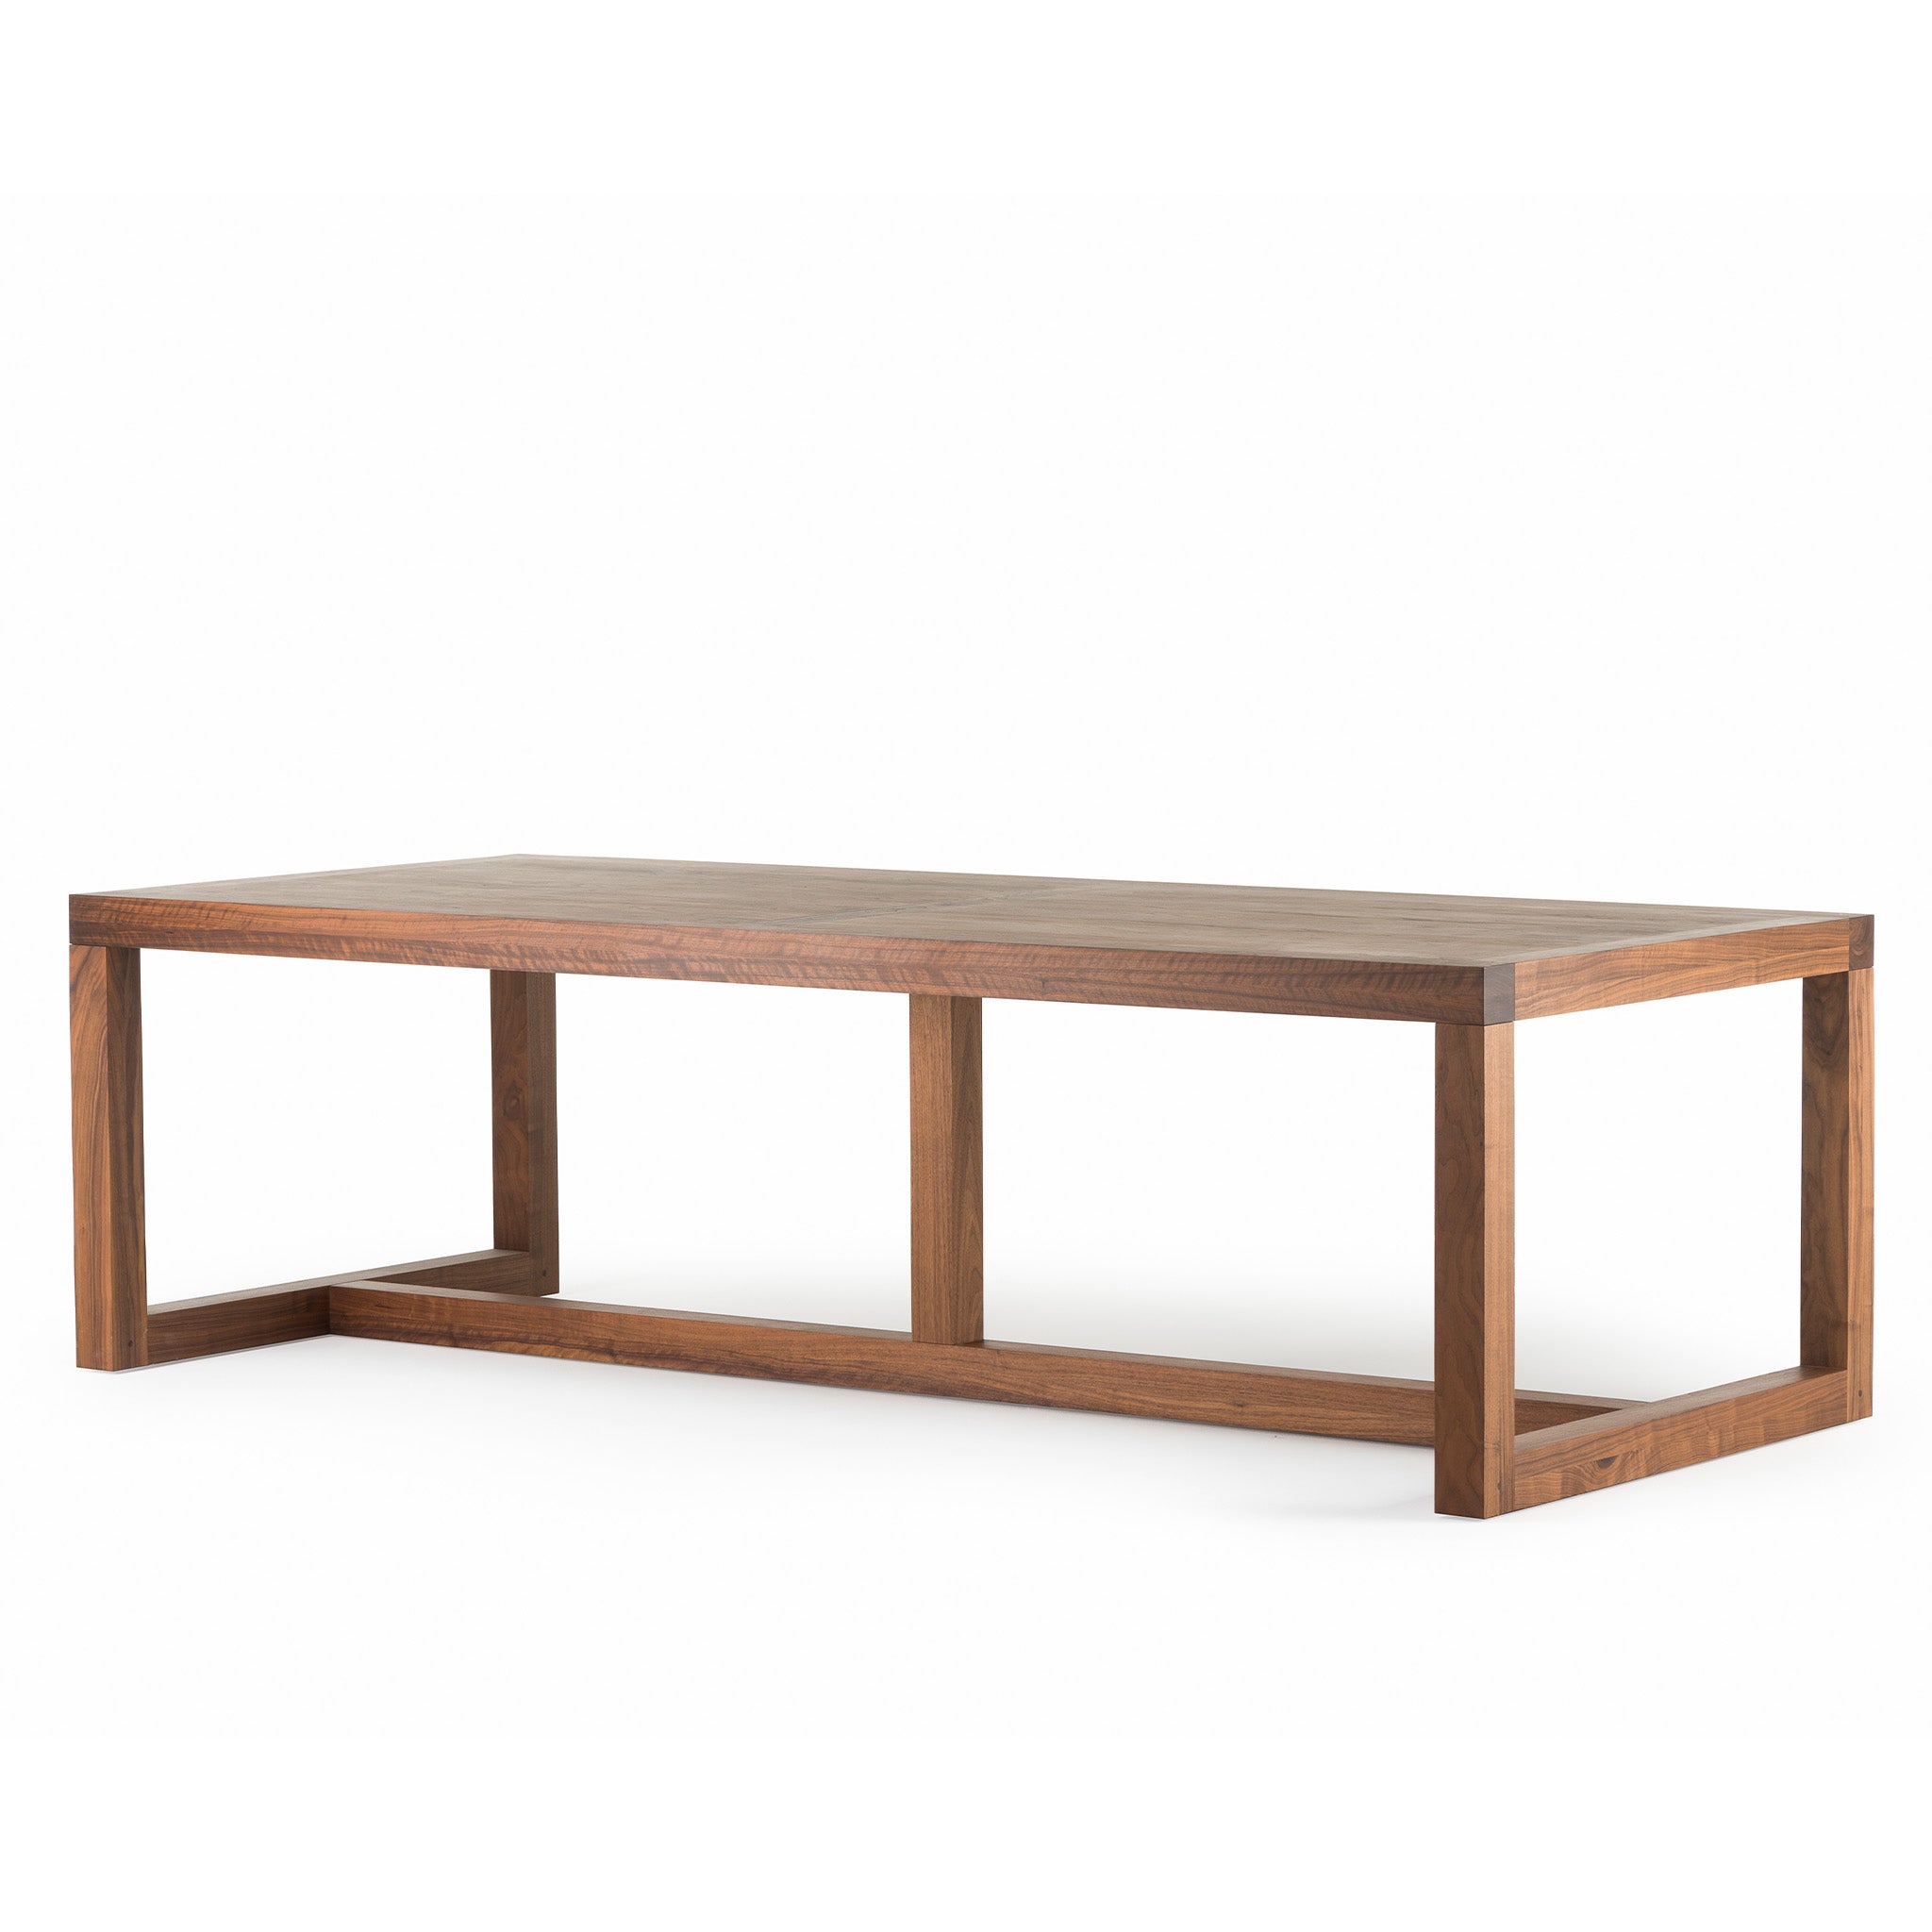 Structure Table by Neri&Hu